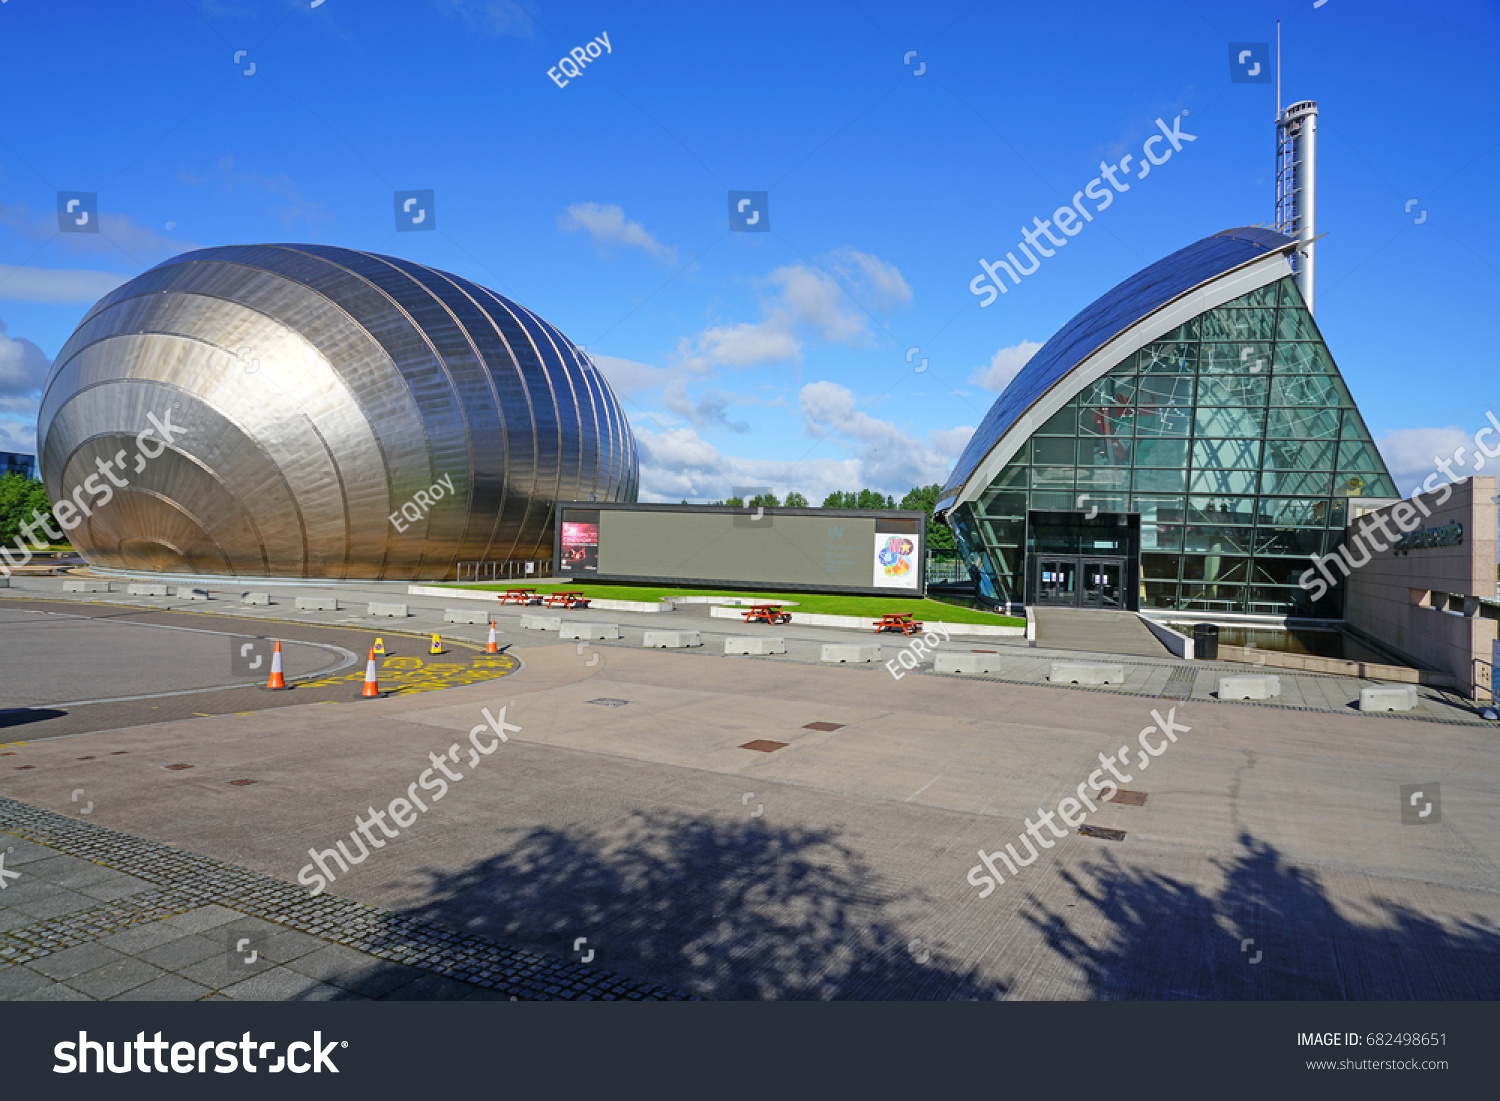 GLASGOW, SCOTLAND -11 JUL 2017- Exterior view of the Glasgow Science Centre, a complex of three modern titanium buildings located in the Clyde Waterfront Regeneration area in Glasgow, Scotland. #682498651